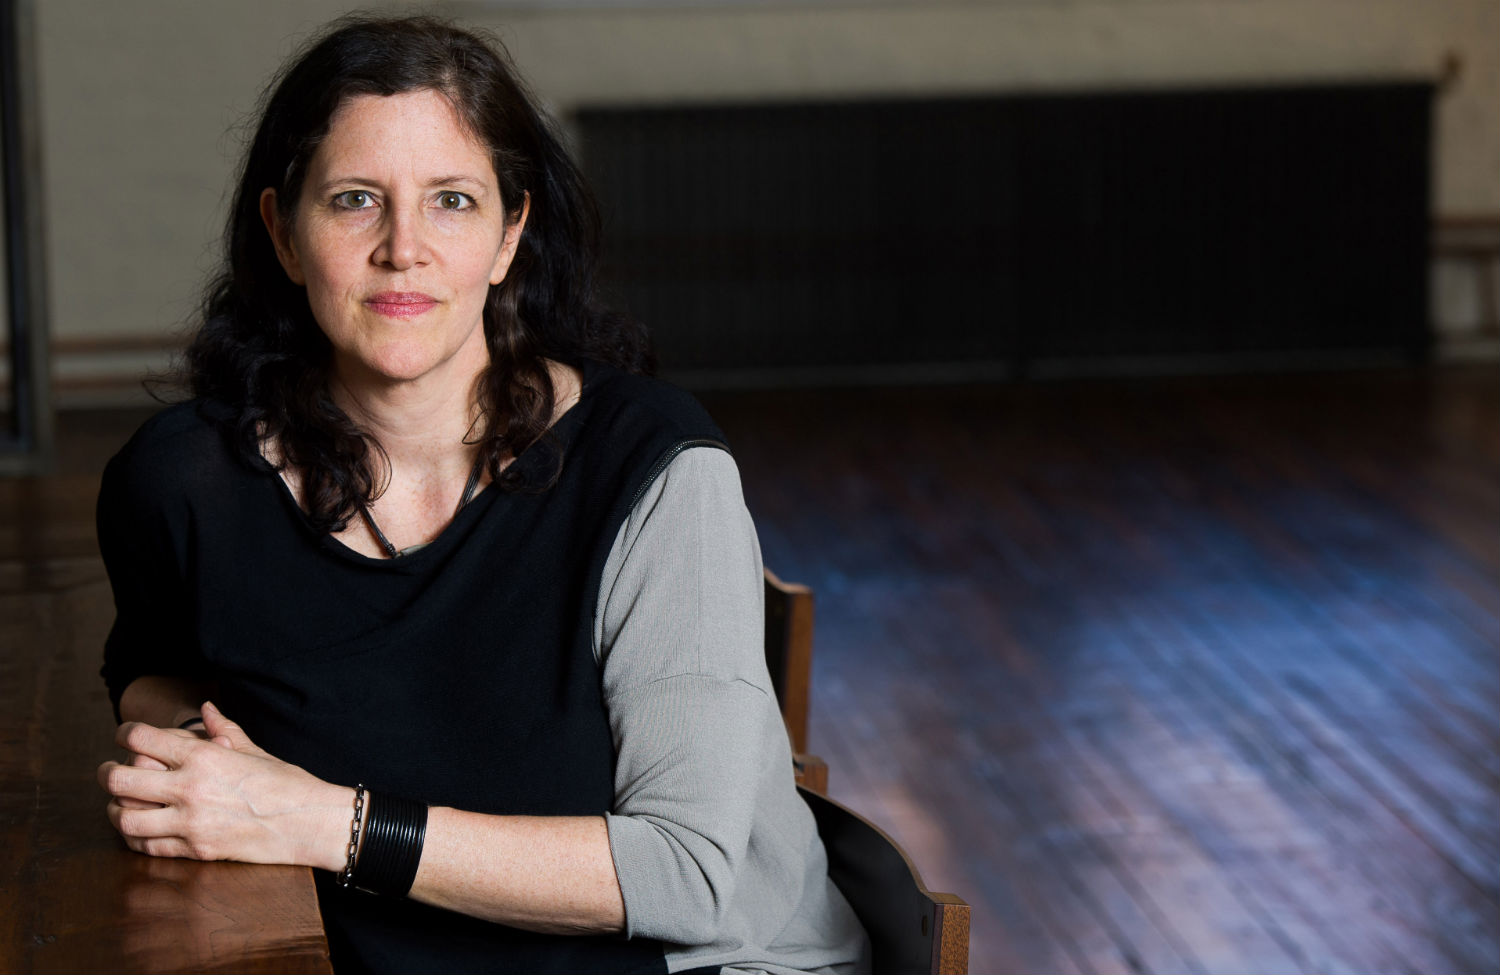 Are We in a Golden Age of Spying? A Q&A With Laura Poitras